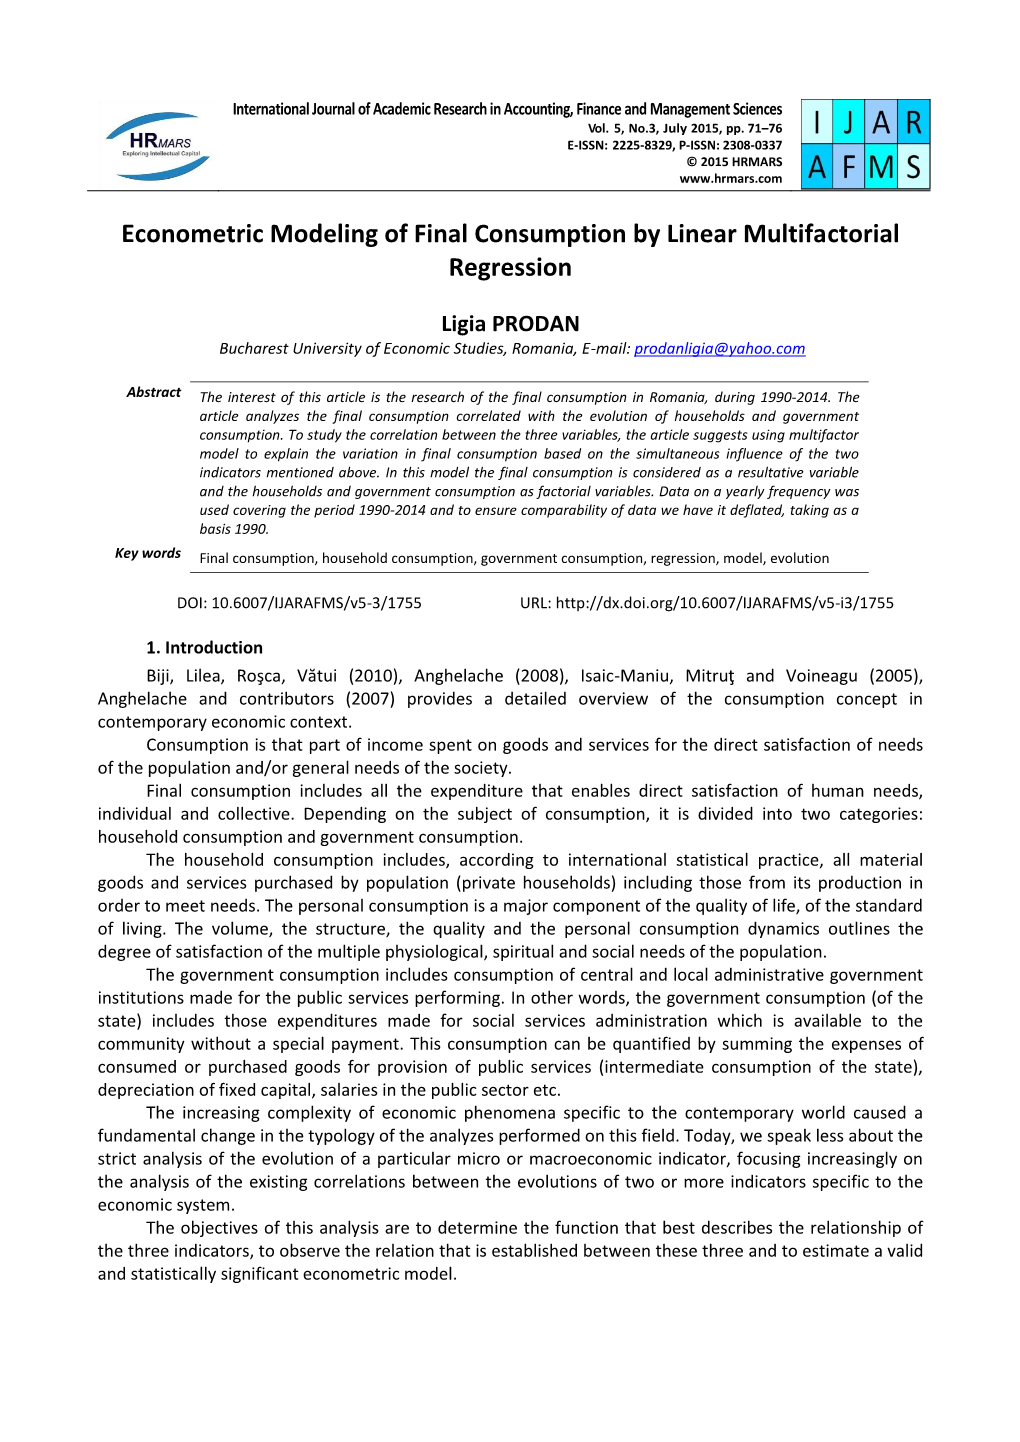 Econometric Modeling of Final Consumption by Linear Multifactorial Regression